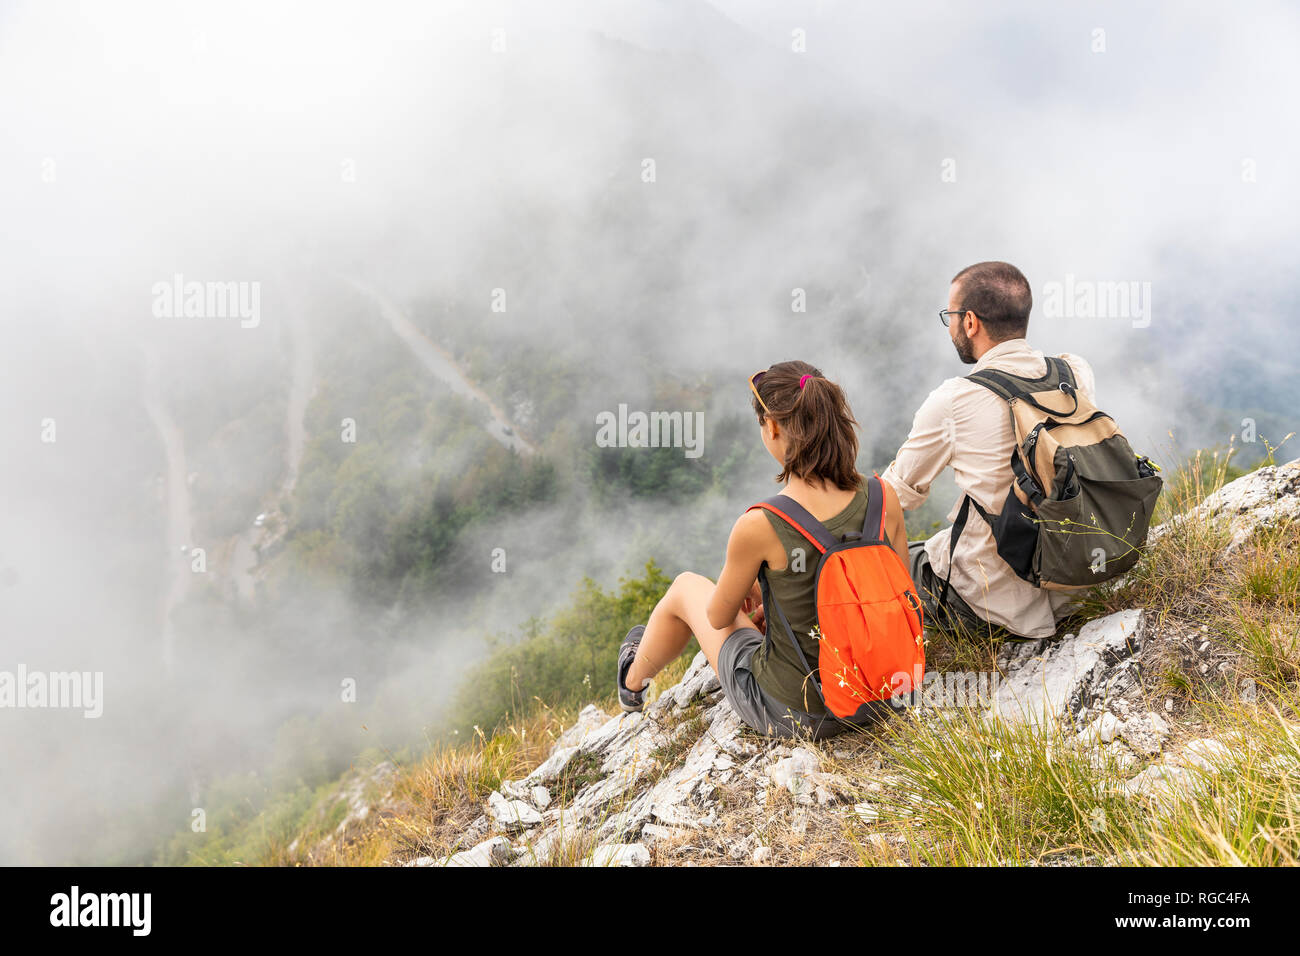 Italy, Massa, couple looking at the beautiful view in the Alpi Apuane Stock Photo